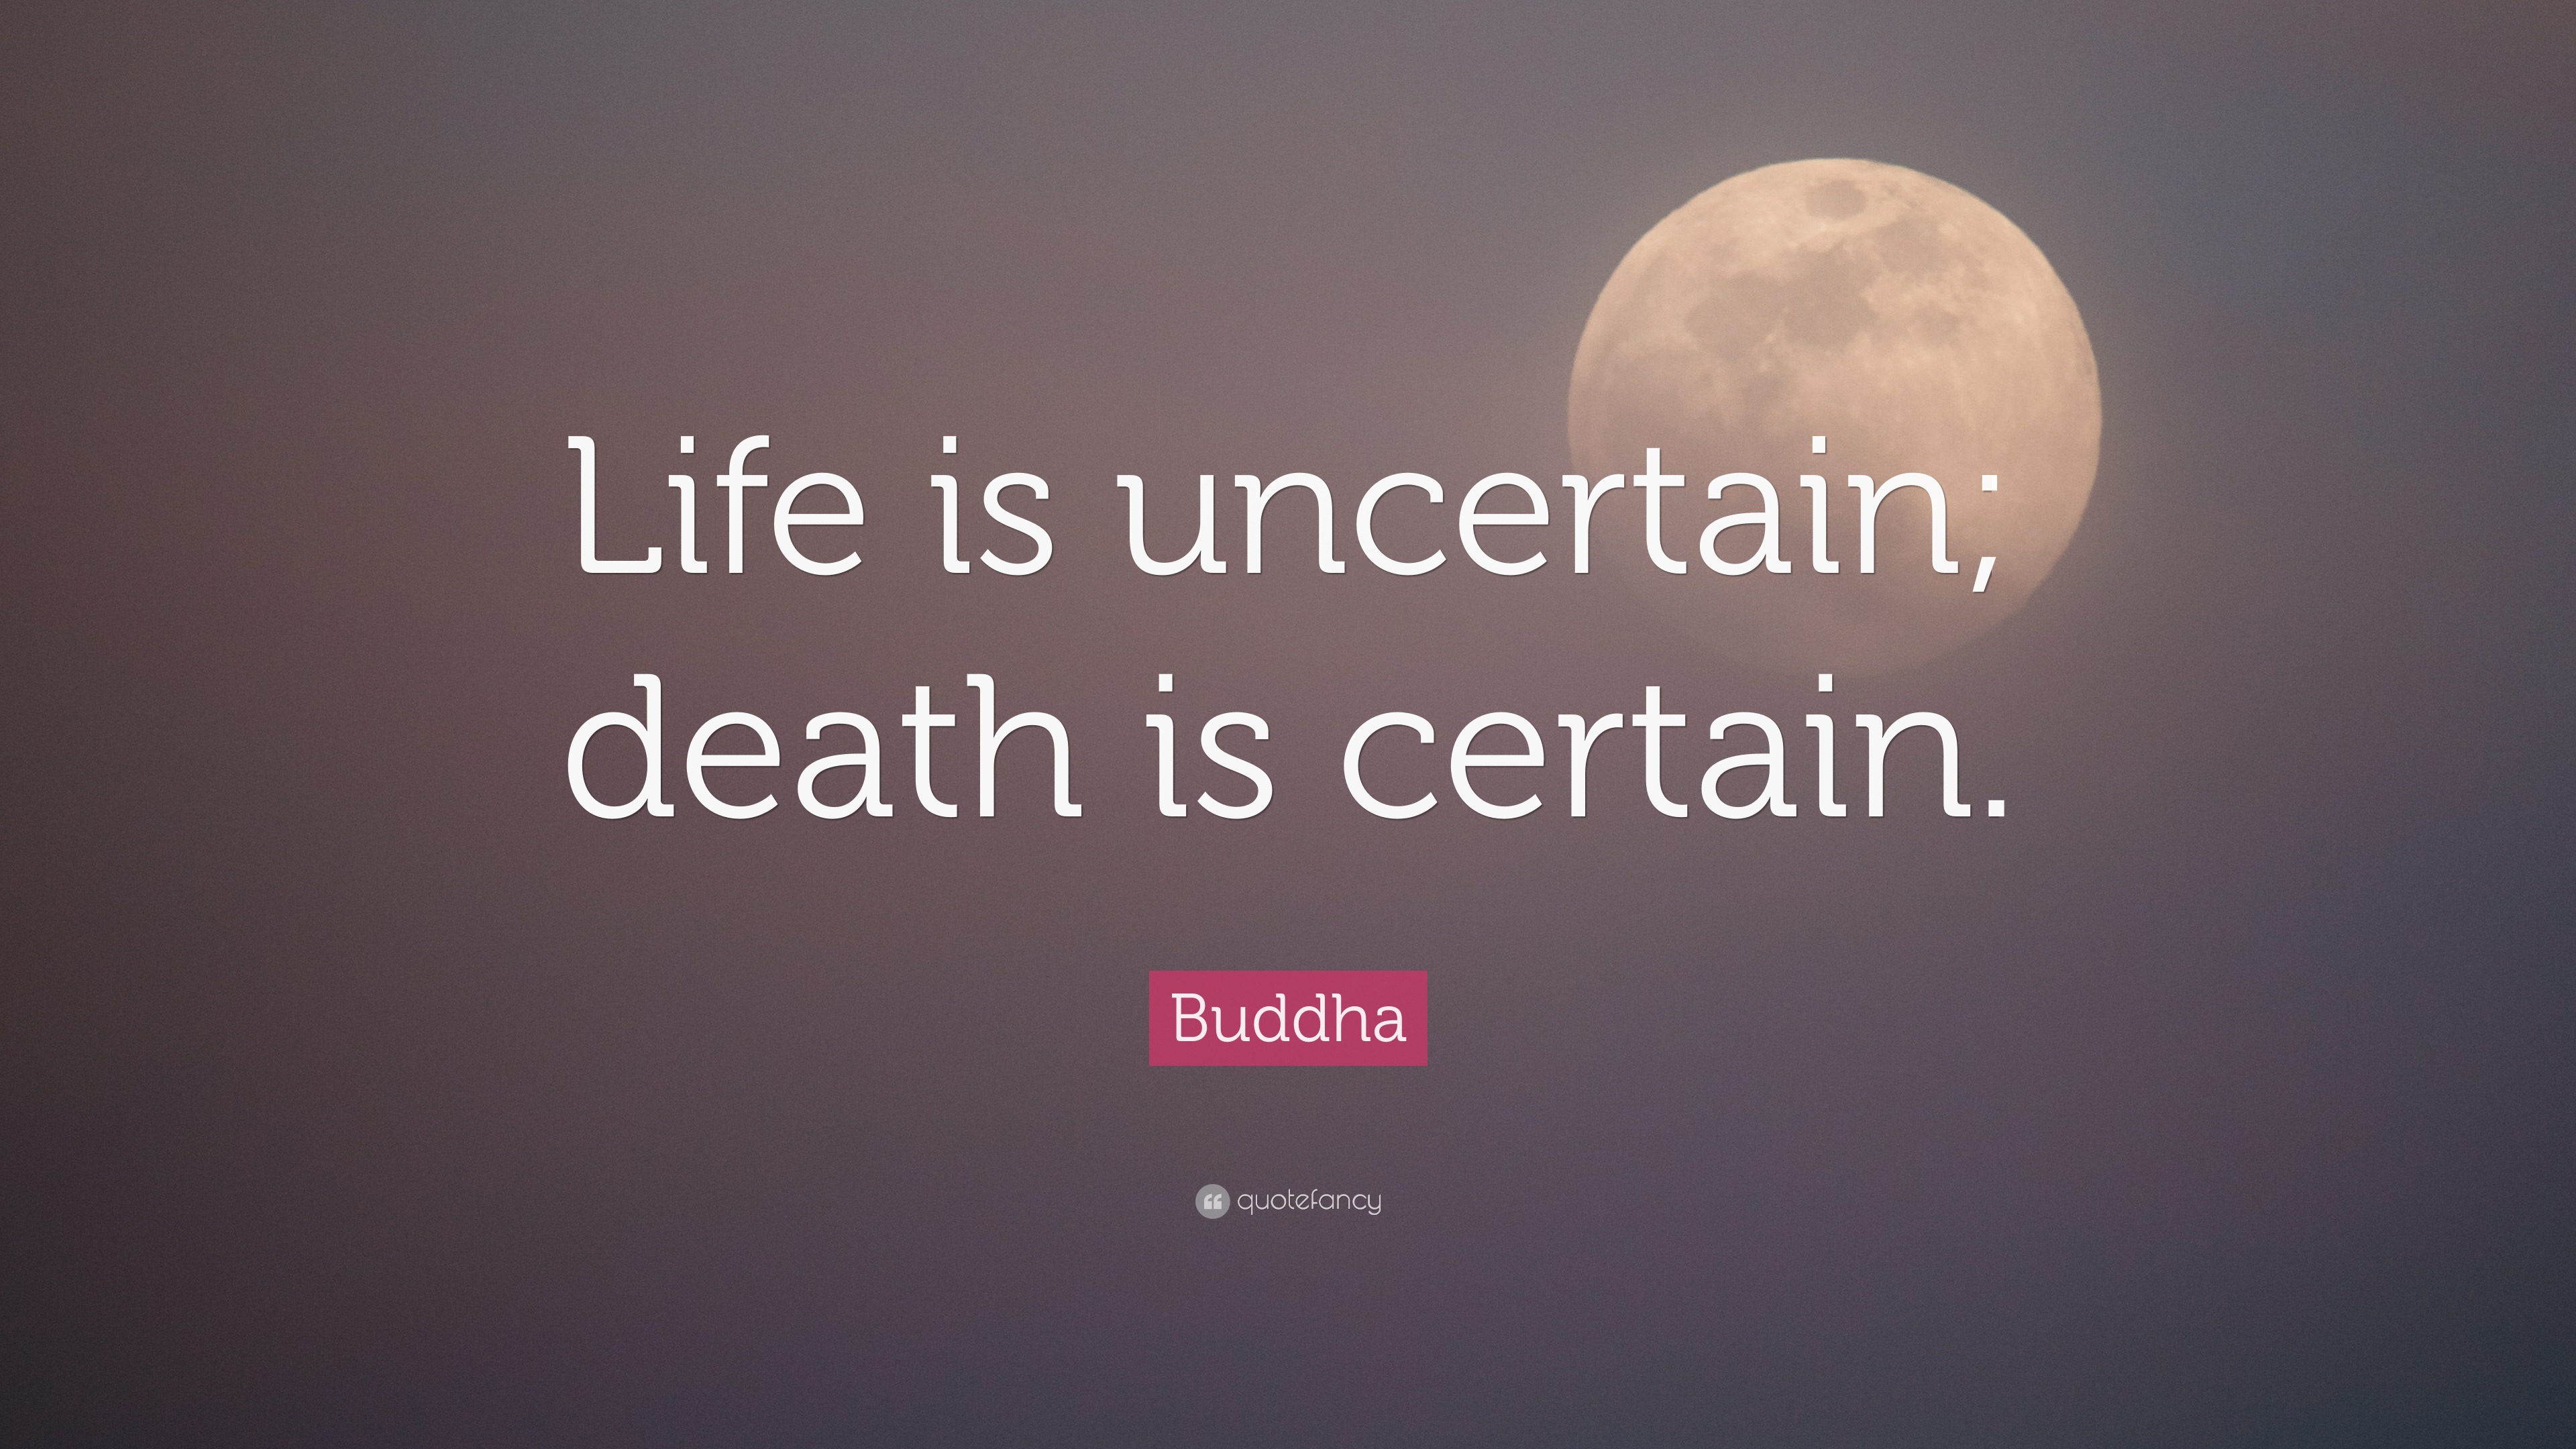 Buddha Quote “Life is uncertain is certain ”